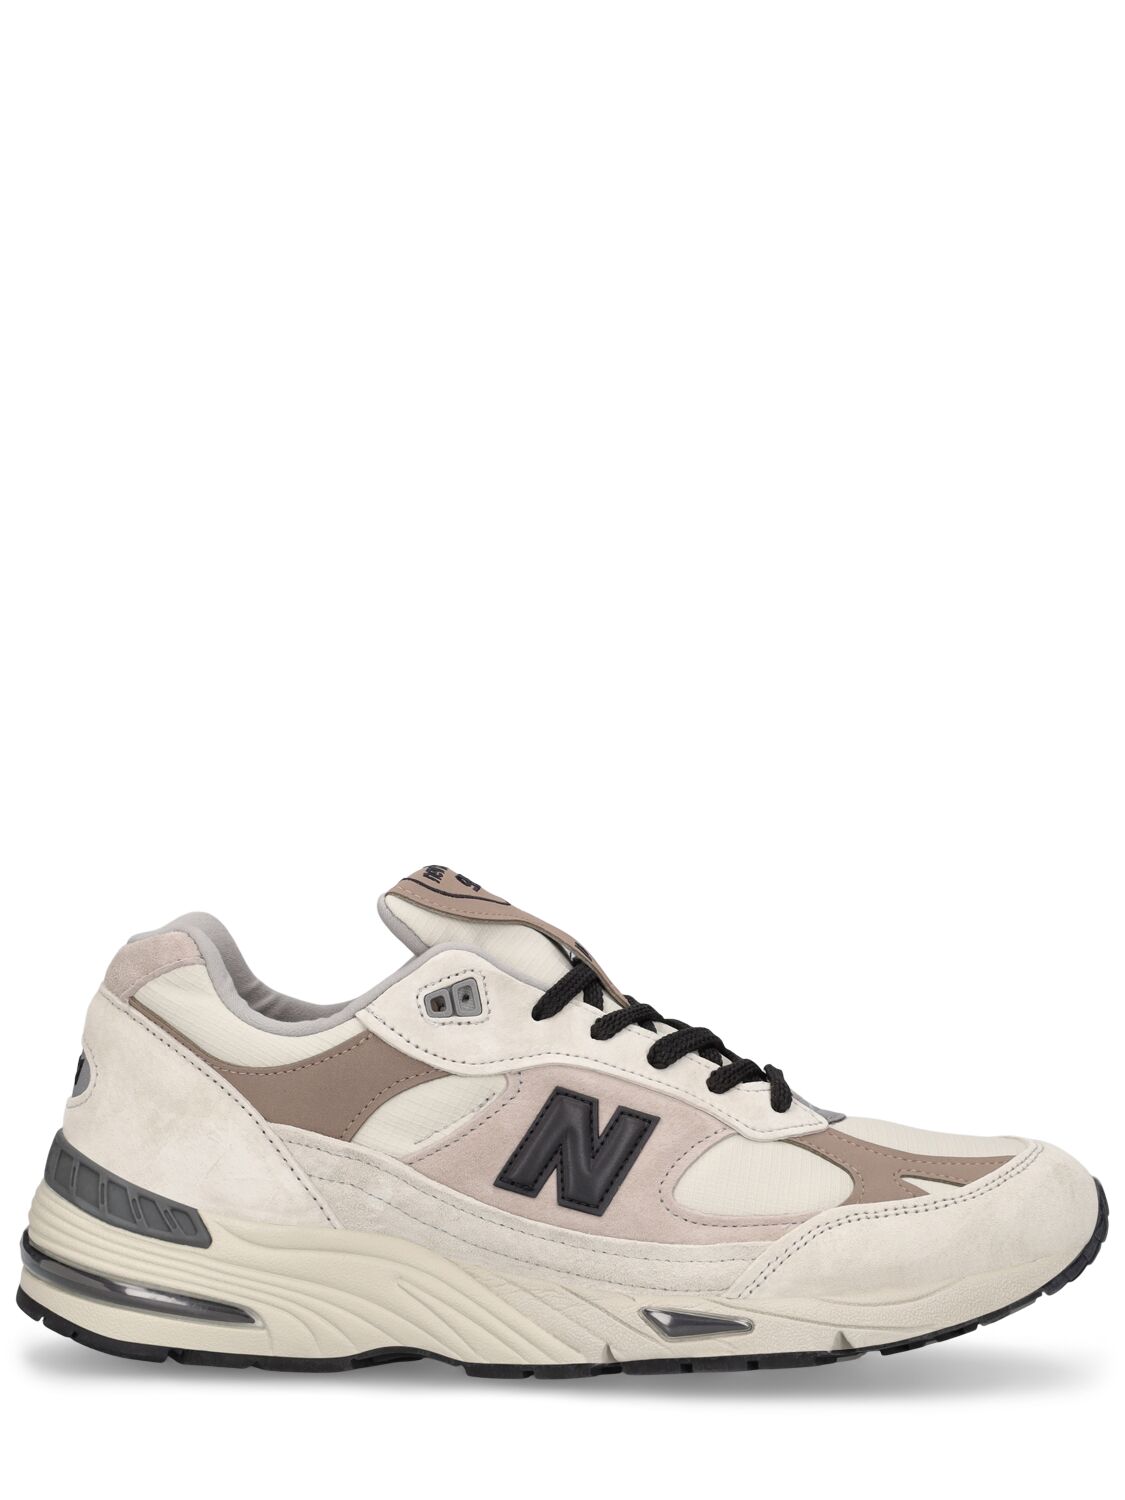 NEW BALANCE 991 MADE IN UK SNEAKERS